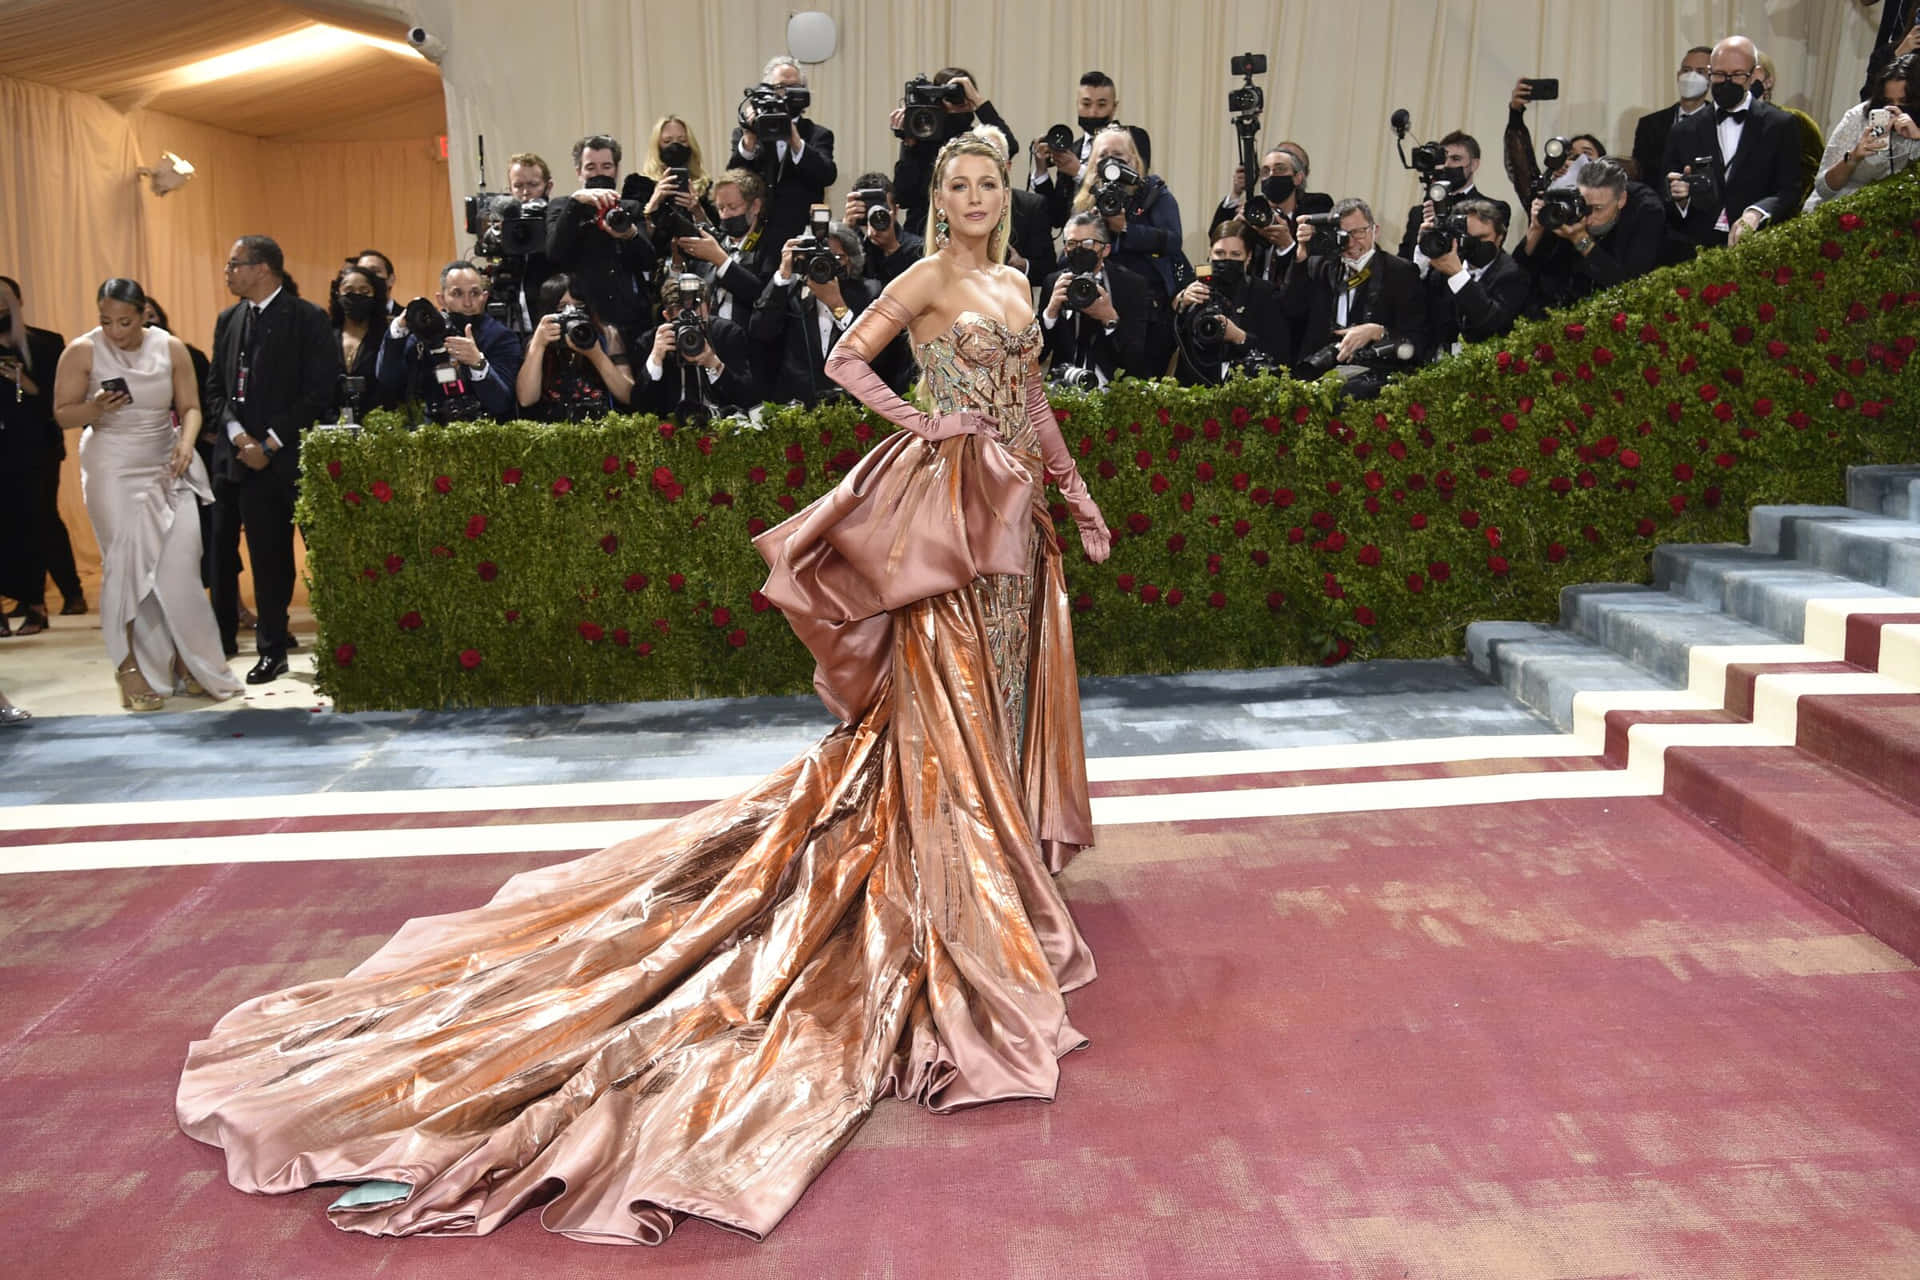 _Photo  Elegant A-listers dressed to the nines at the Met Gala ball_